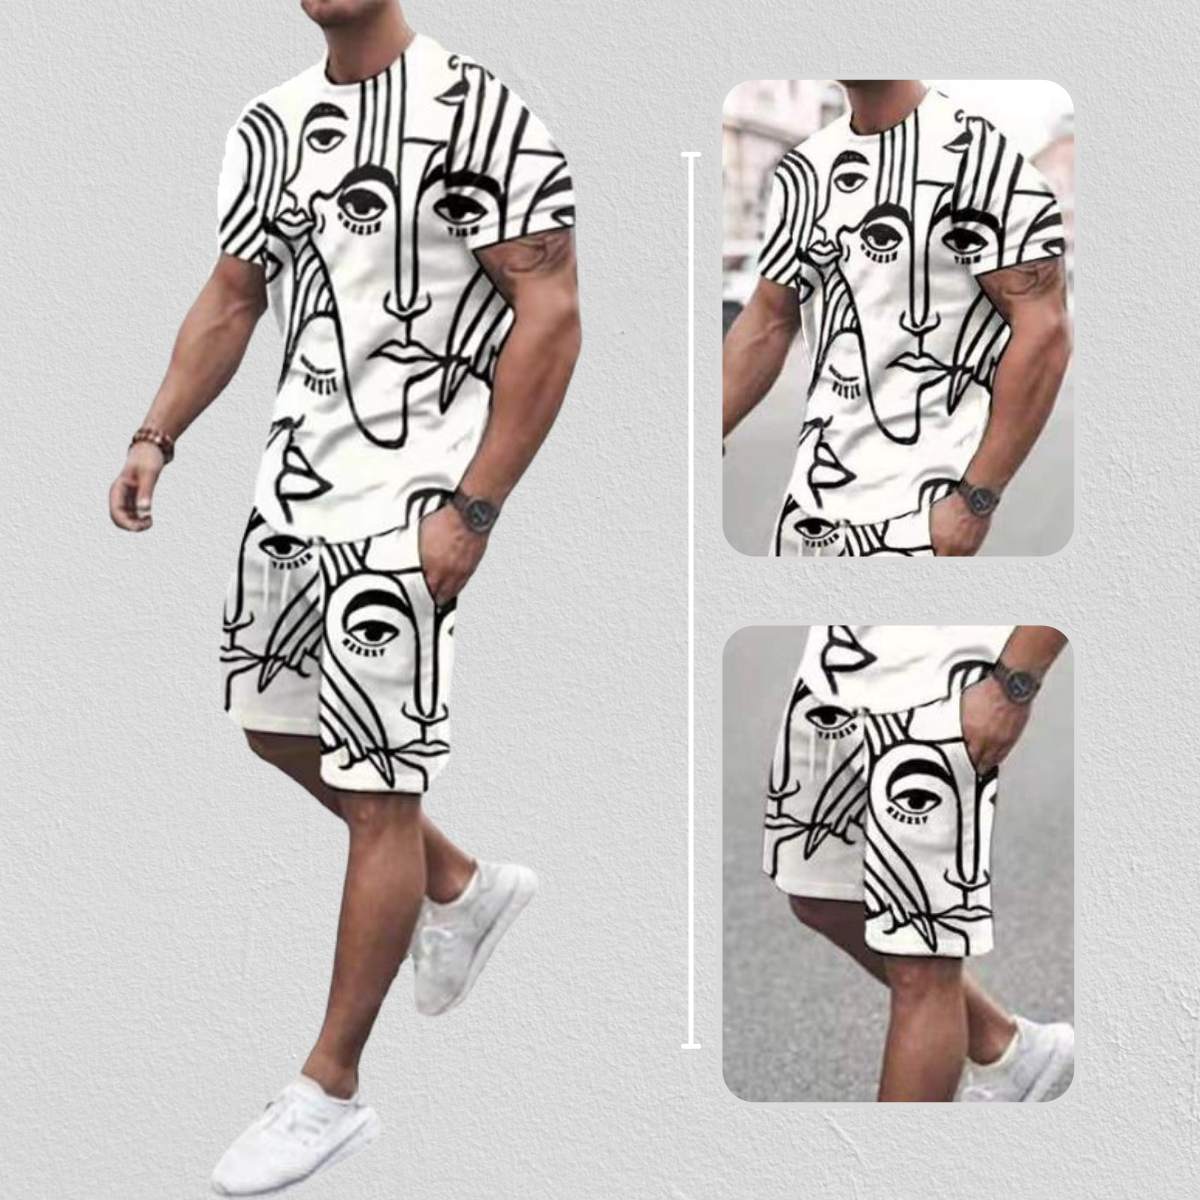 Abstract Face Art Shorts Tracksuit with unique design4